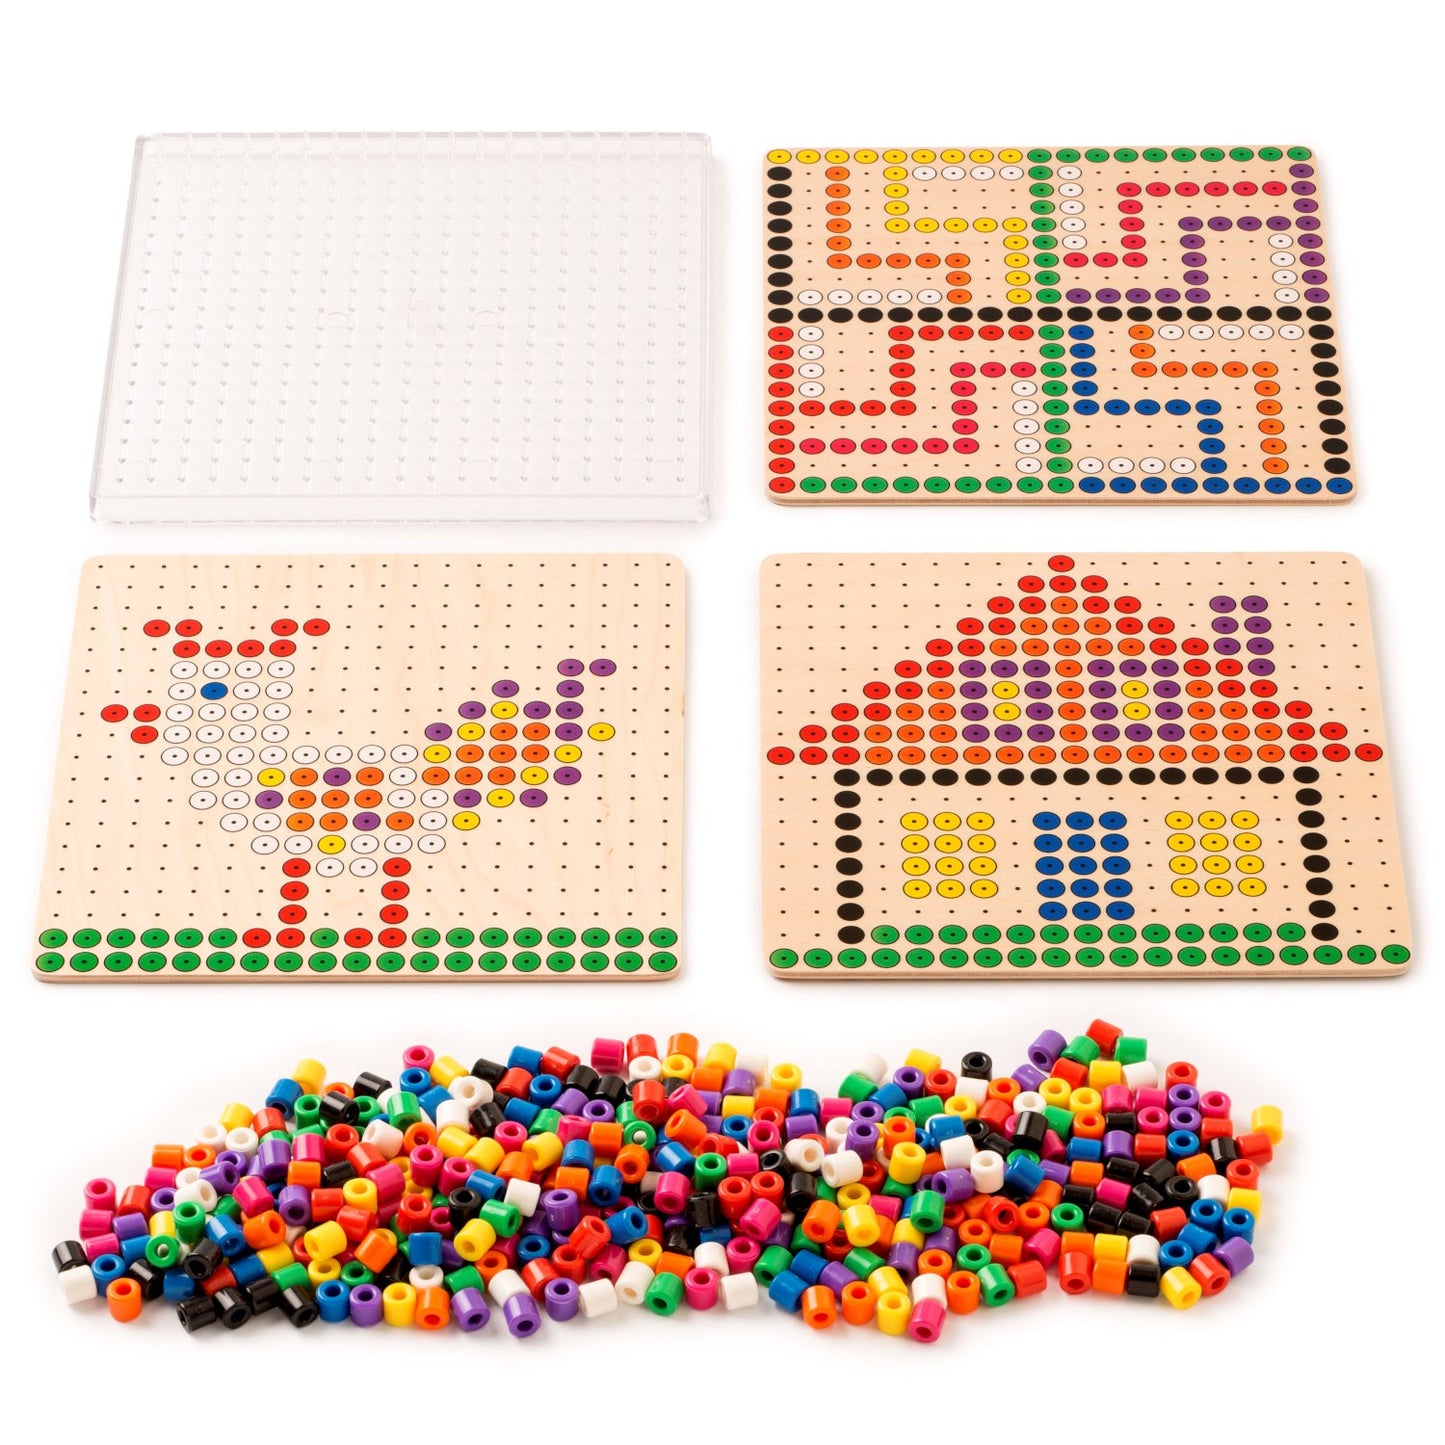 Toys for Life Build with Beads Game 插珠做圖遊戲